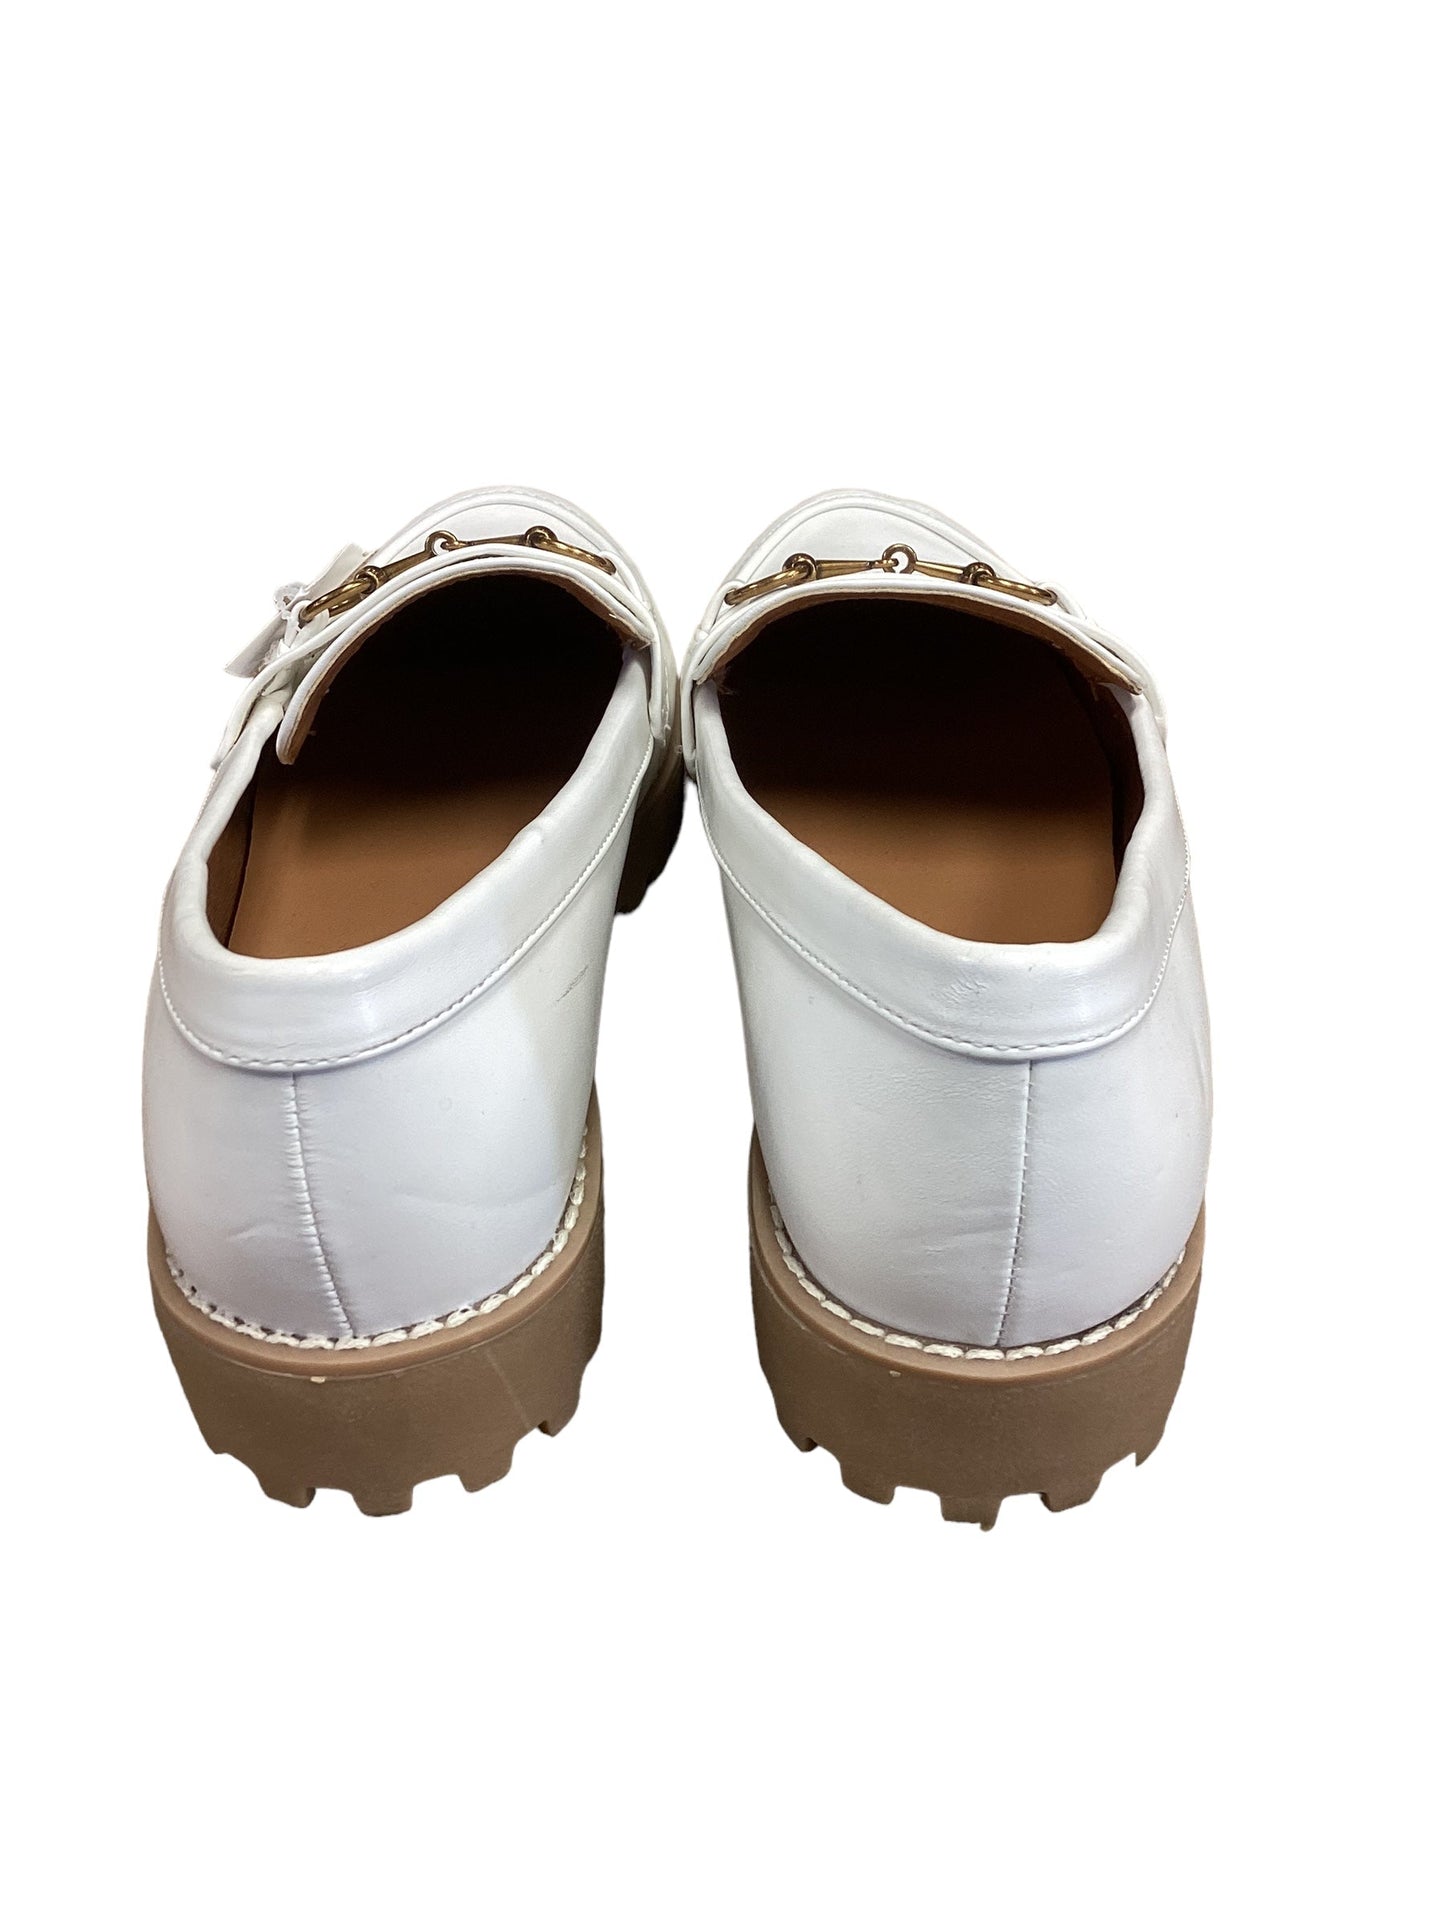 White Shoes Flats A New Day, Size 8.5